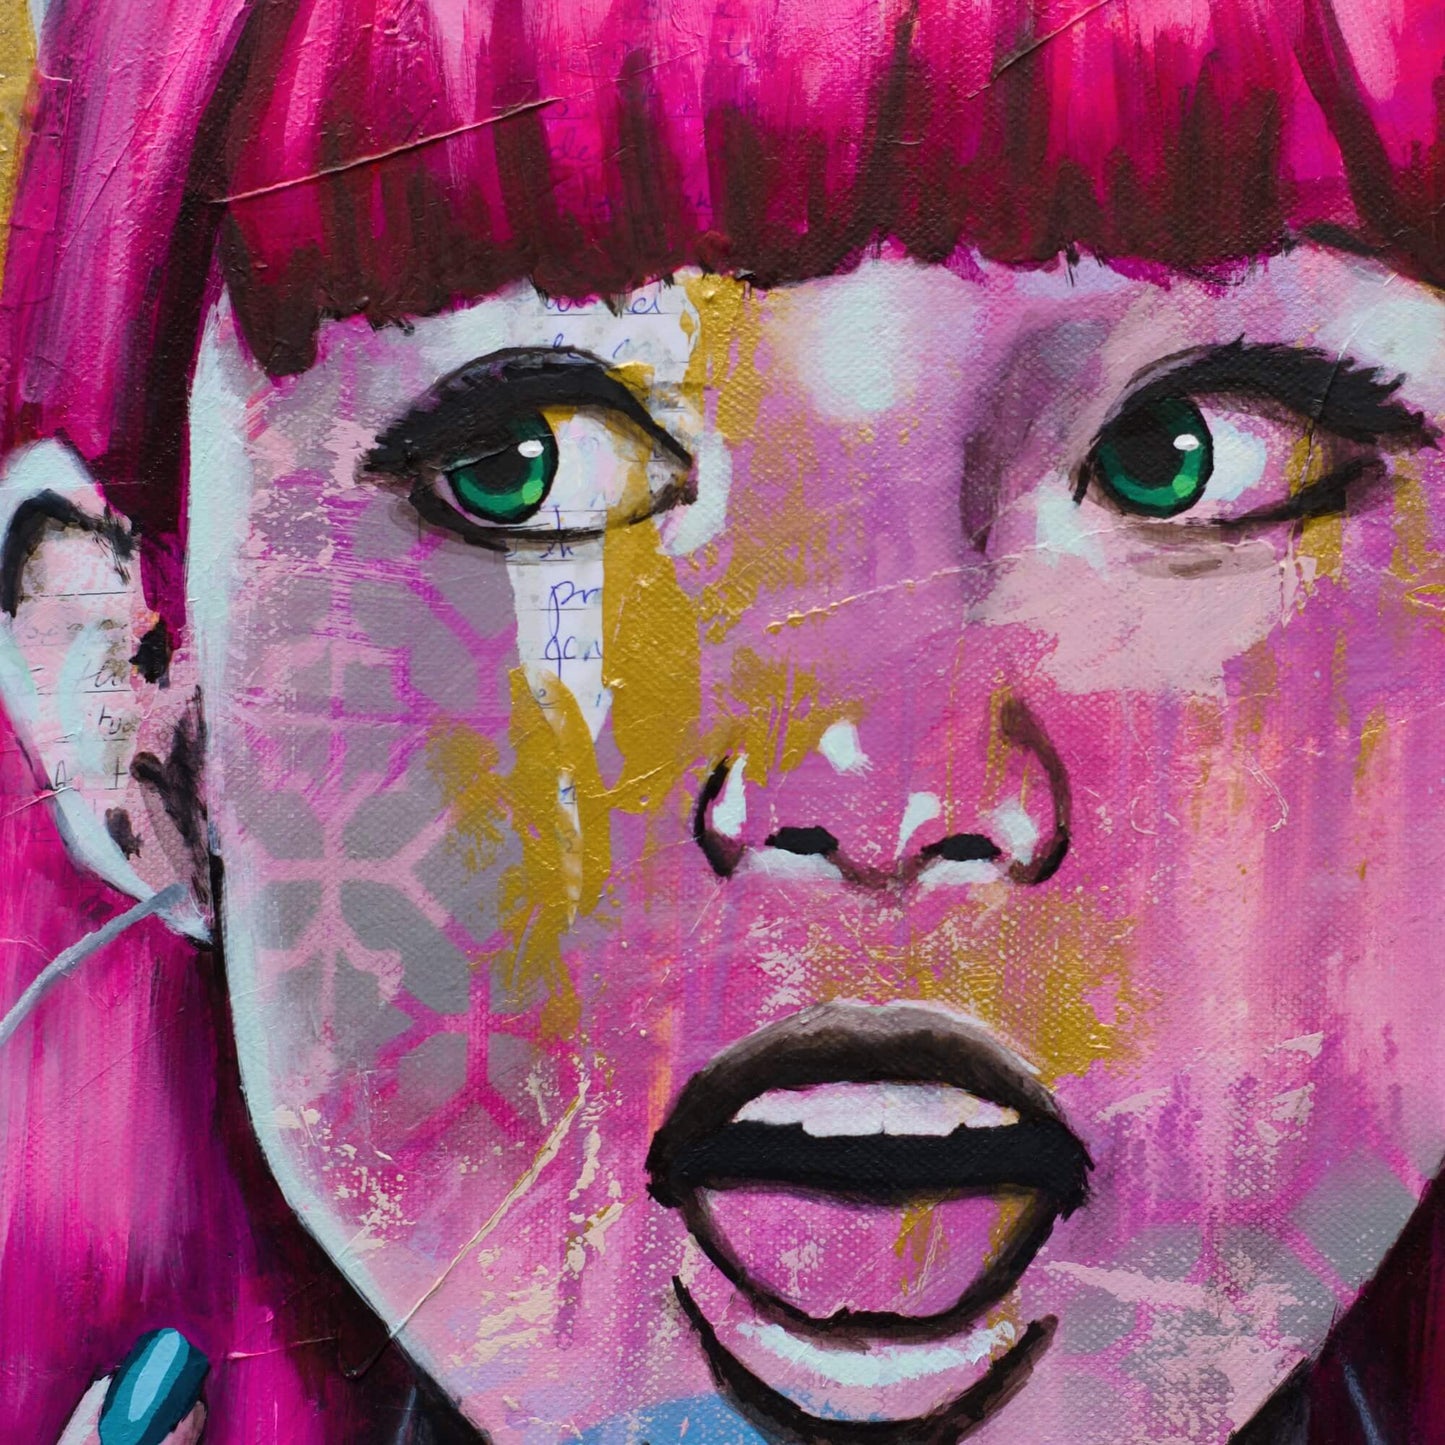 Artworks for Sale – Feminine Street Art of Women - Pink & Gold Painting - 'Shock & Awe' – Art Wall Painting by Criss Chaney